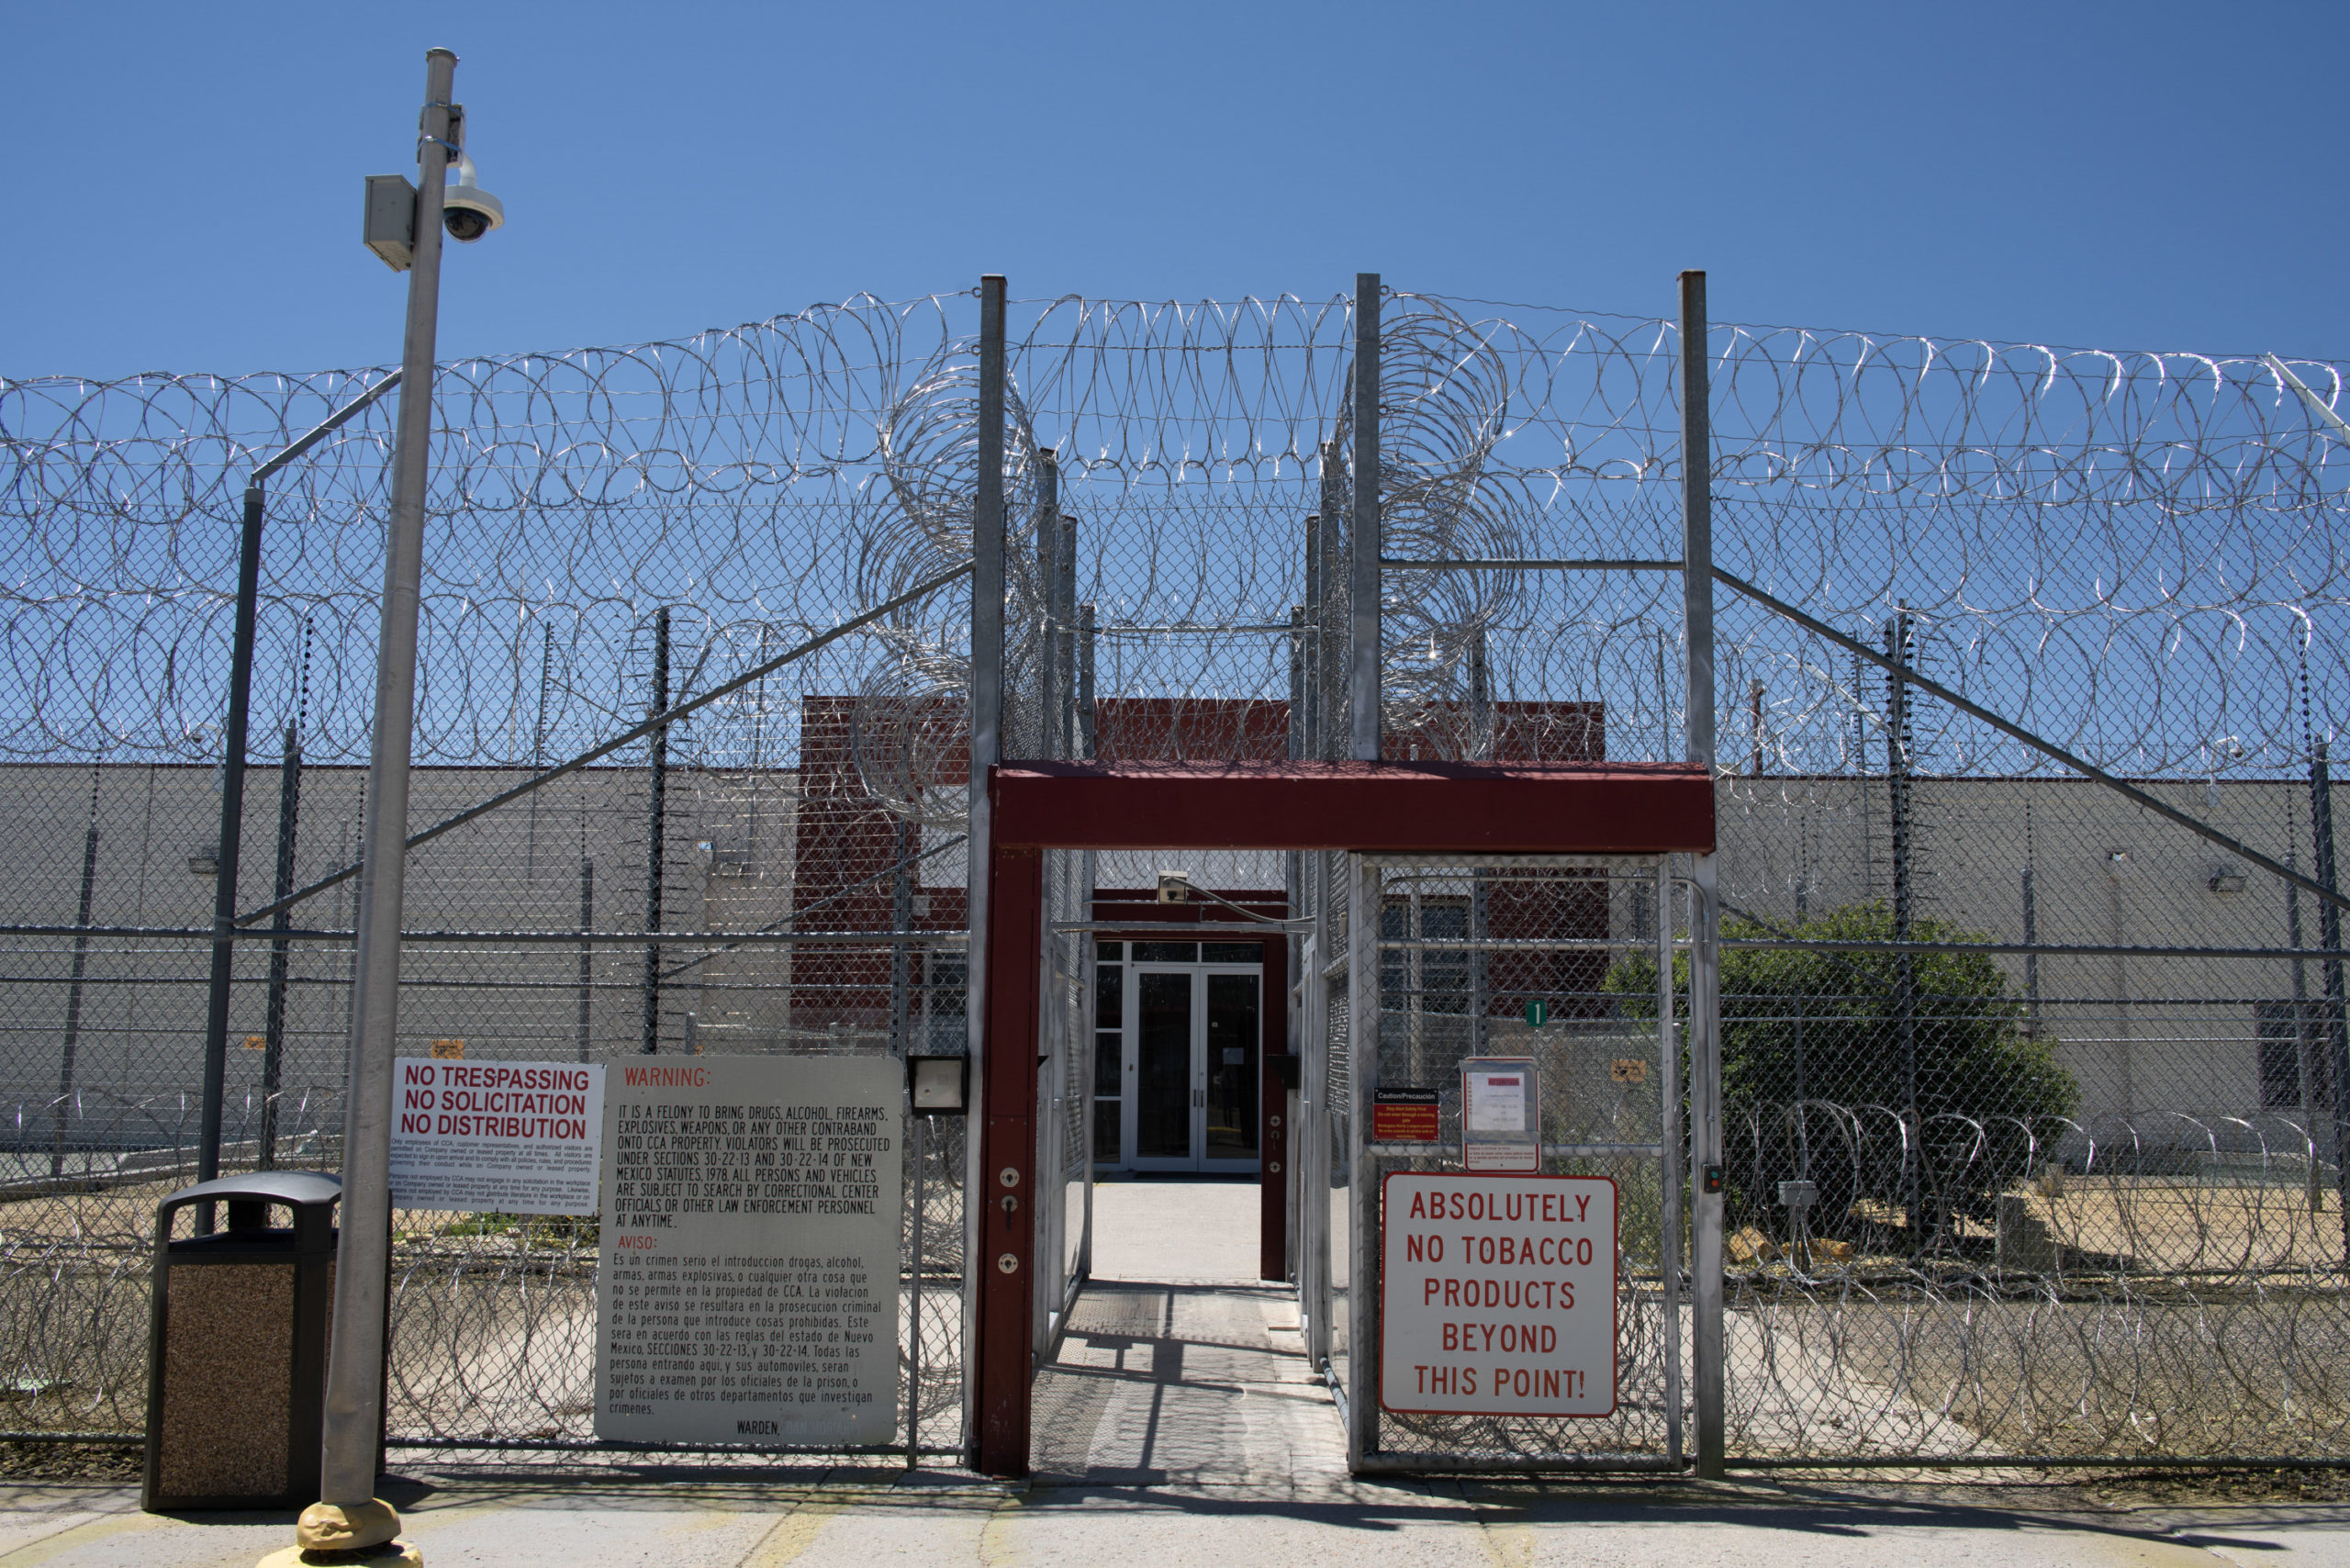 Imprisoned migrants seeking better prison conditions describe an attack by pepper- spraying guards